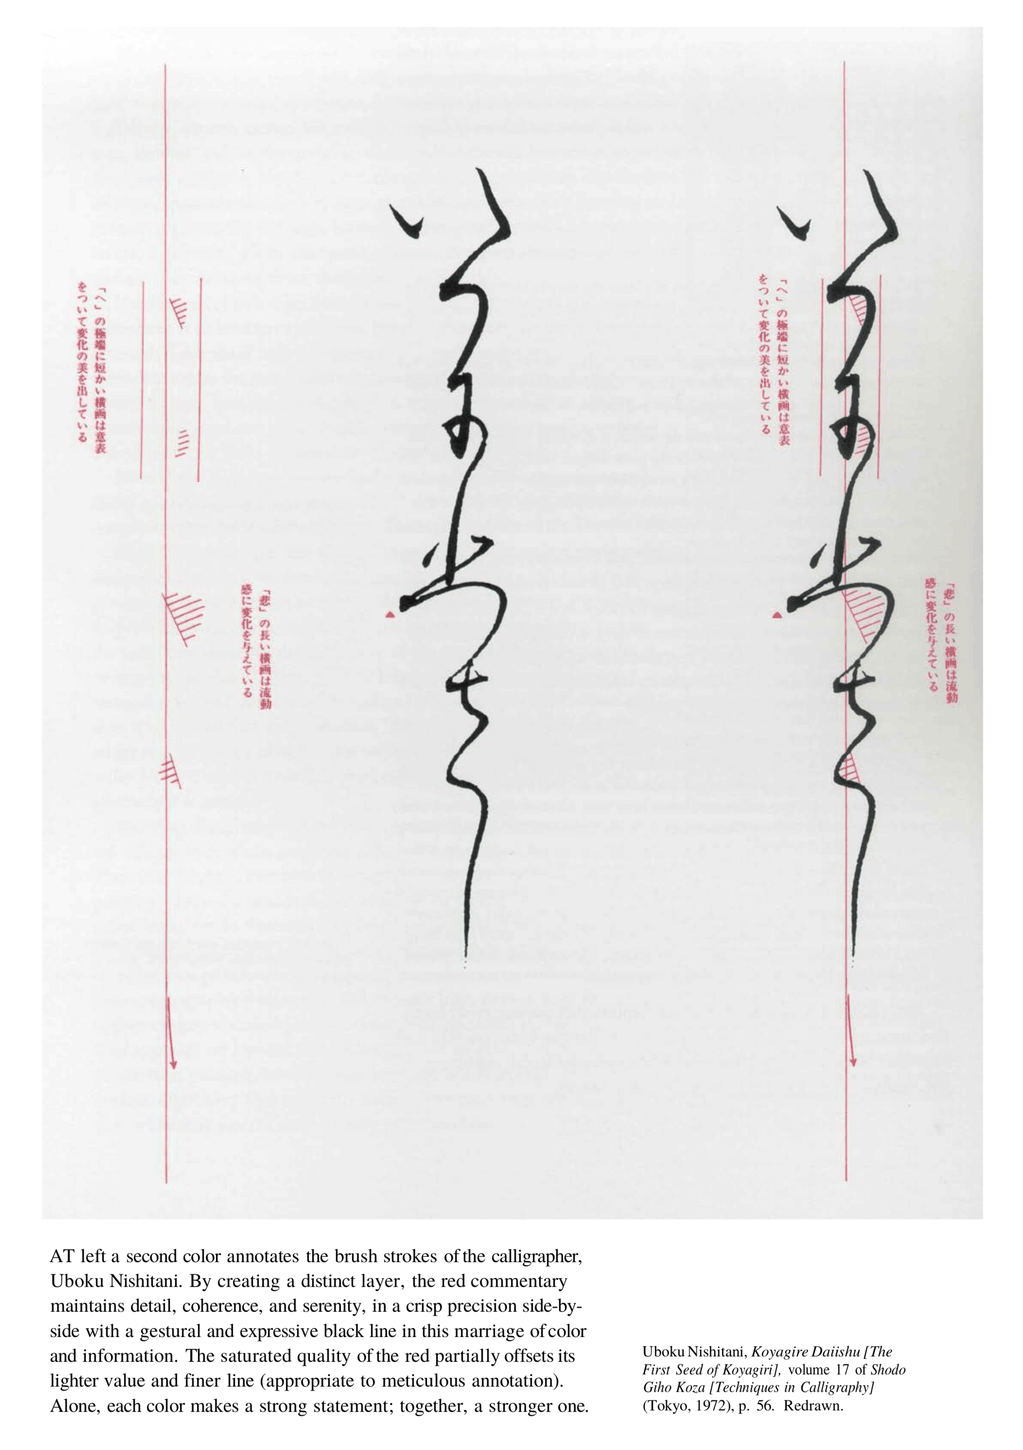 Japanese calligraphy with rubrication commentary, Uboku Nishitani1972 (“The First Seed of Koyagiri”, v17 Techniques in Calligraphy); from pg54 of chapter 3, “Layering and Separation” of Envisioning Information, Tufte1990